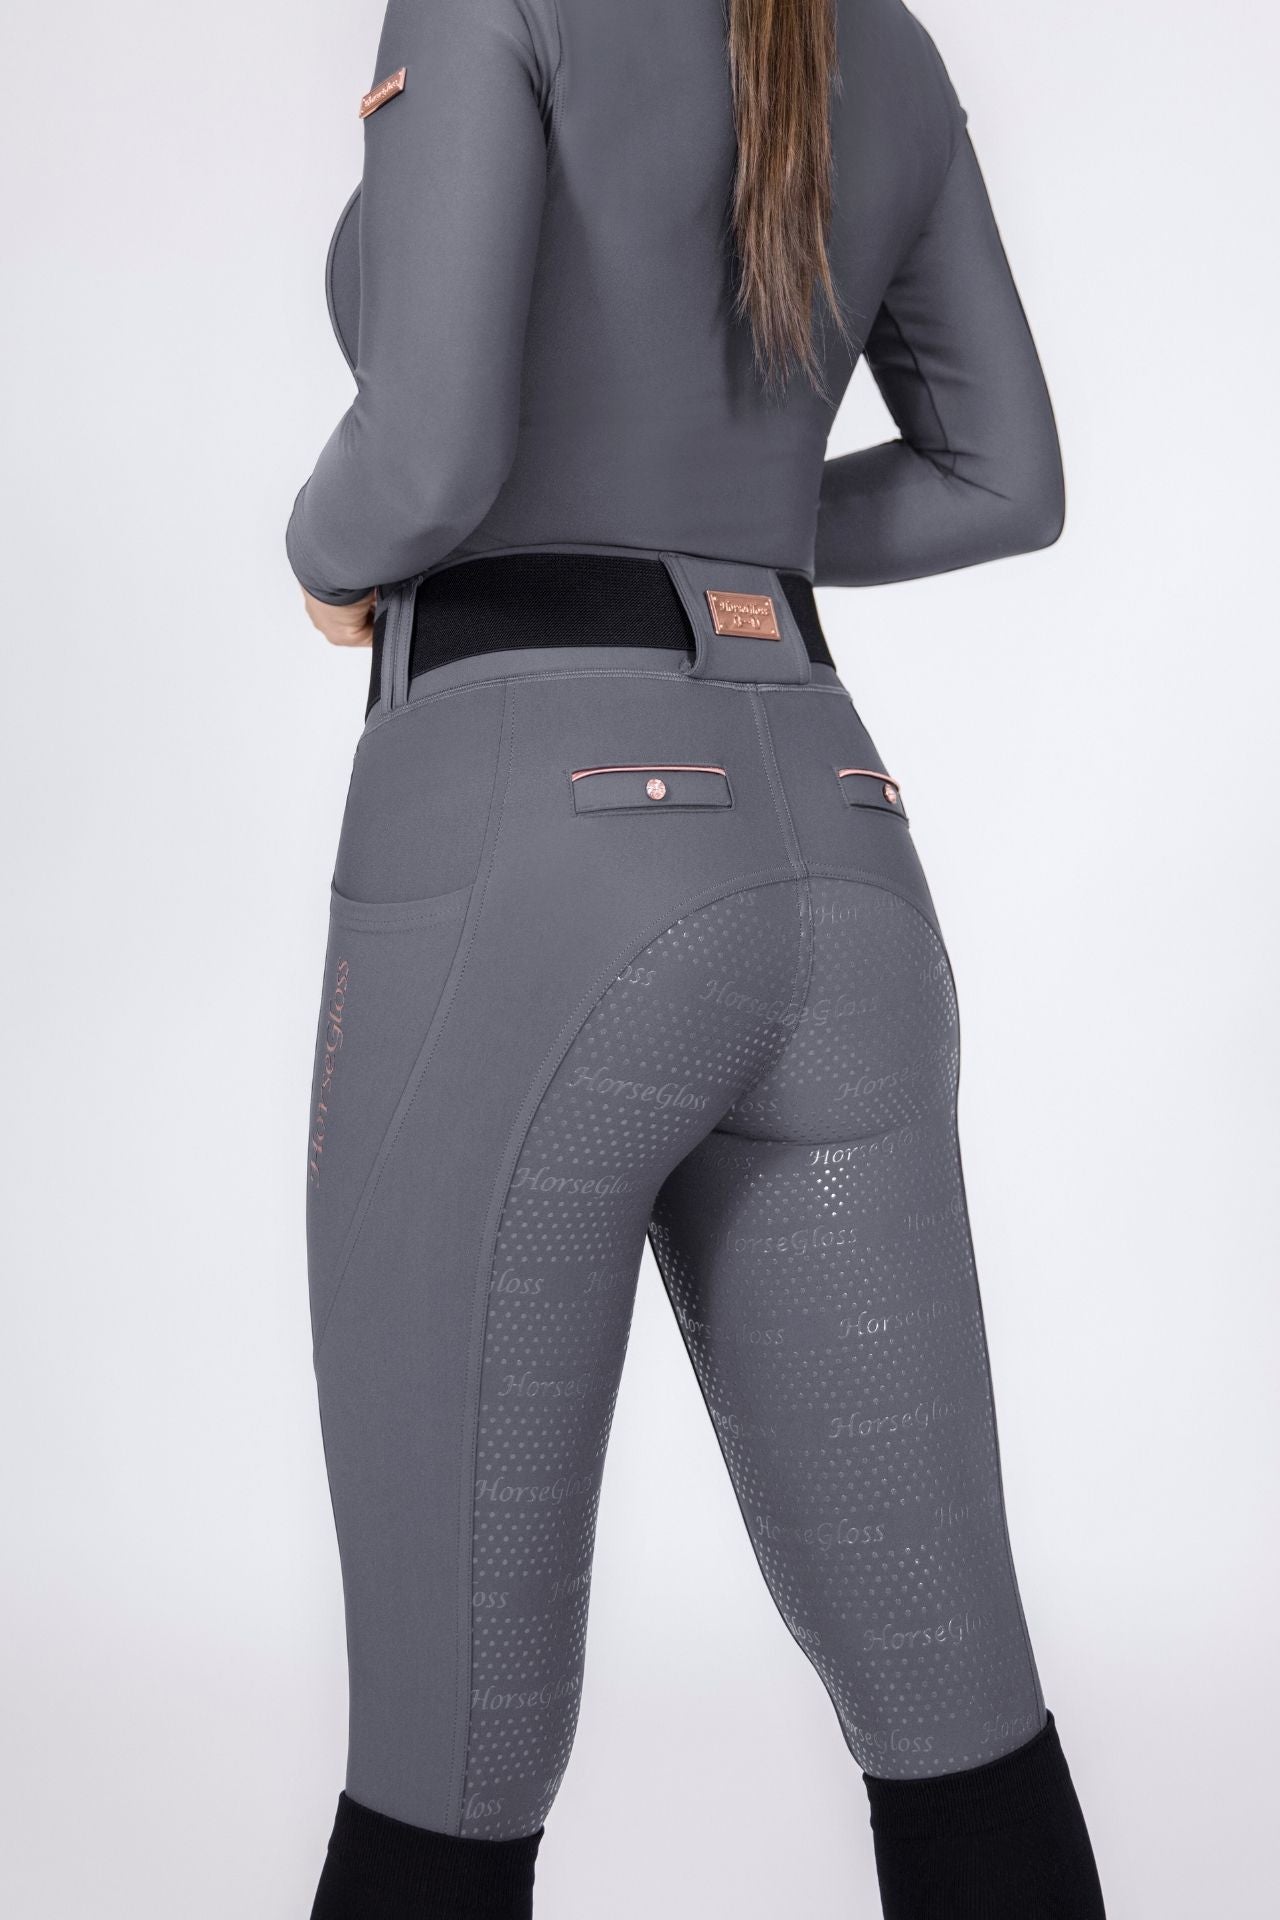 Foxy Riding Tights- Charcoal - Foxy Equestrian